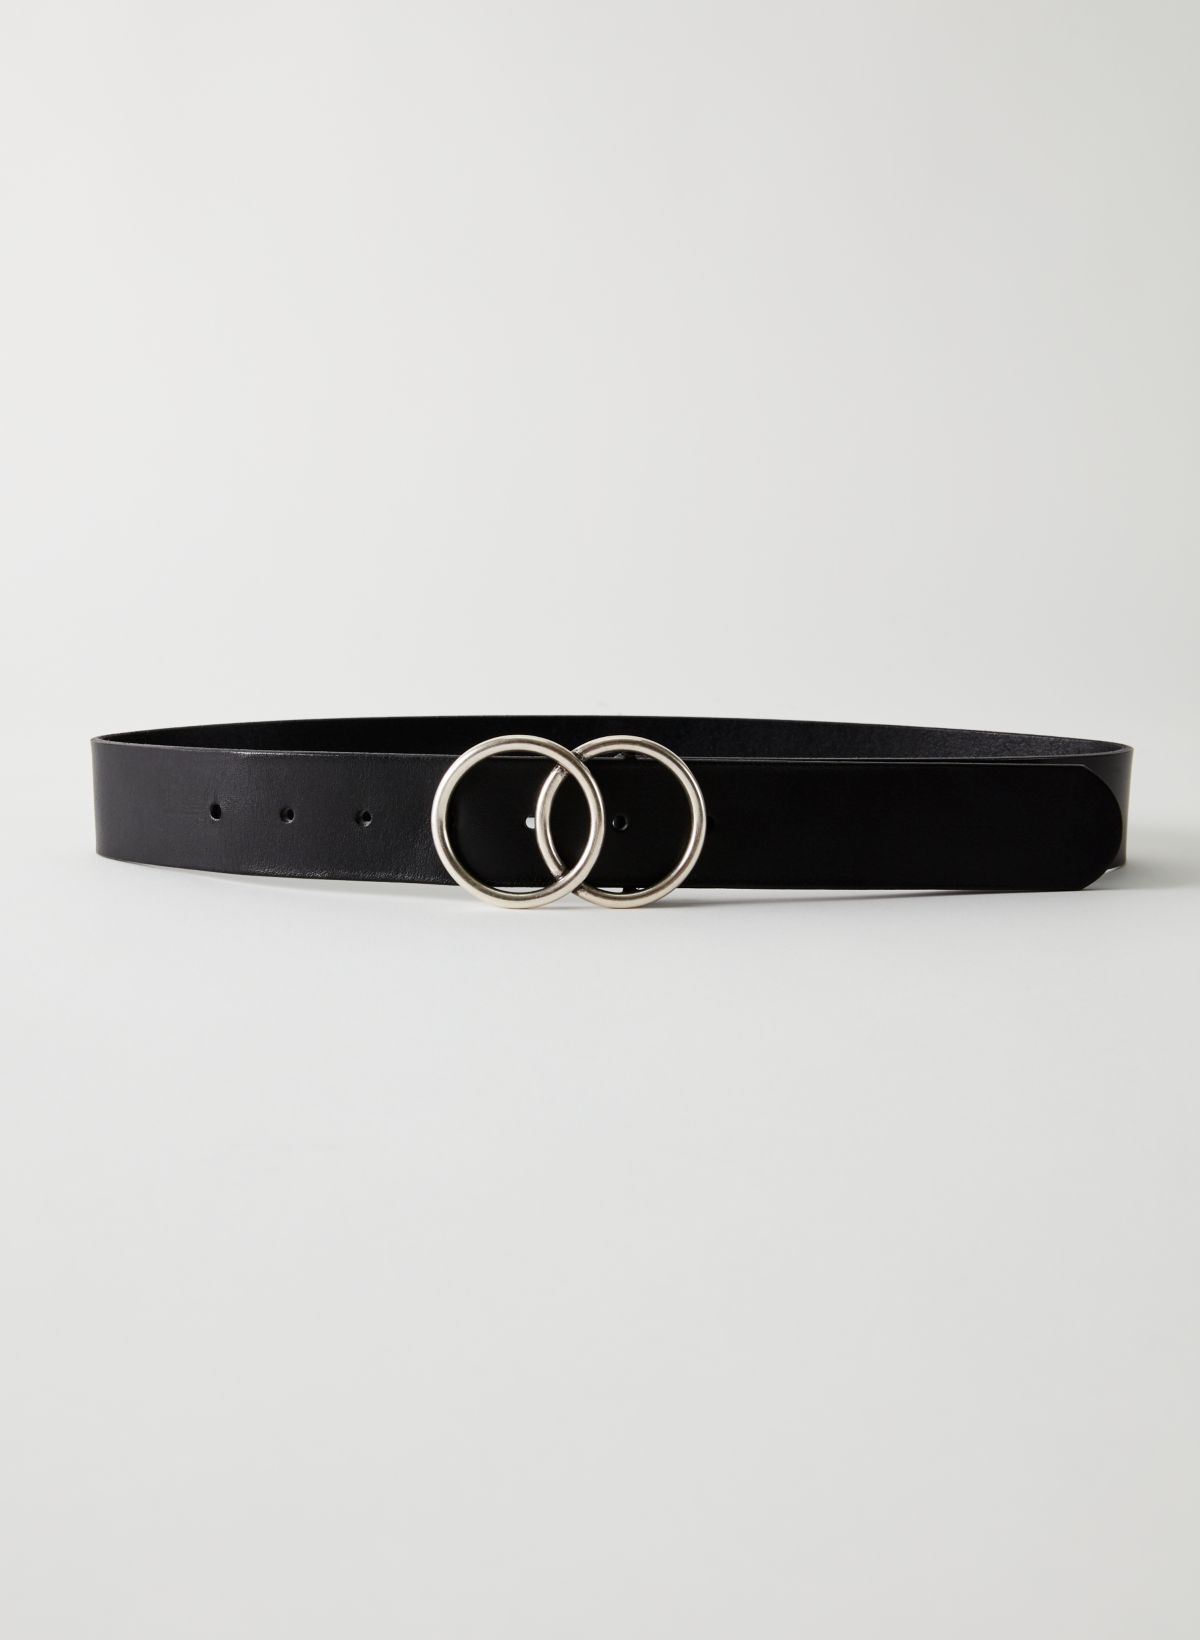 The SAUSALITO Black Double Ring Classic Leather Belt